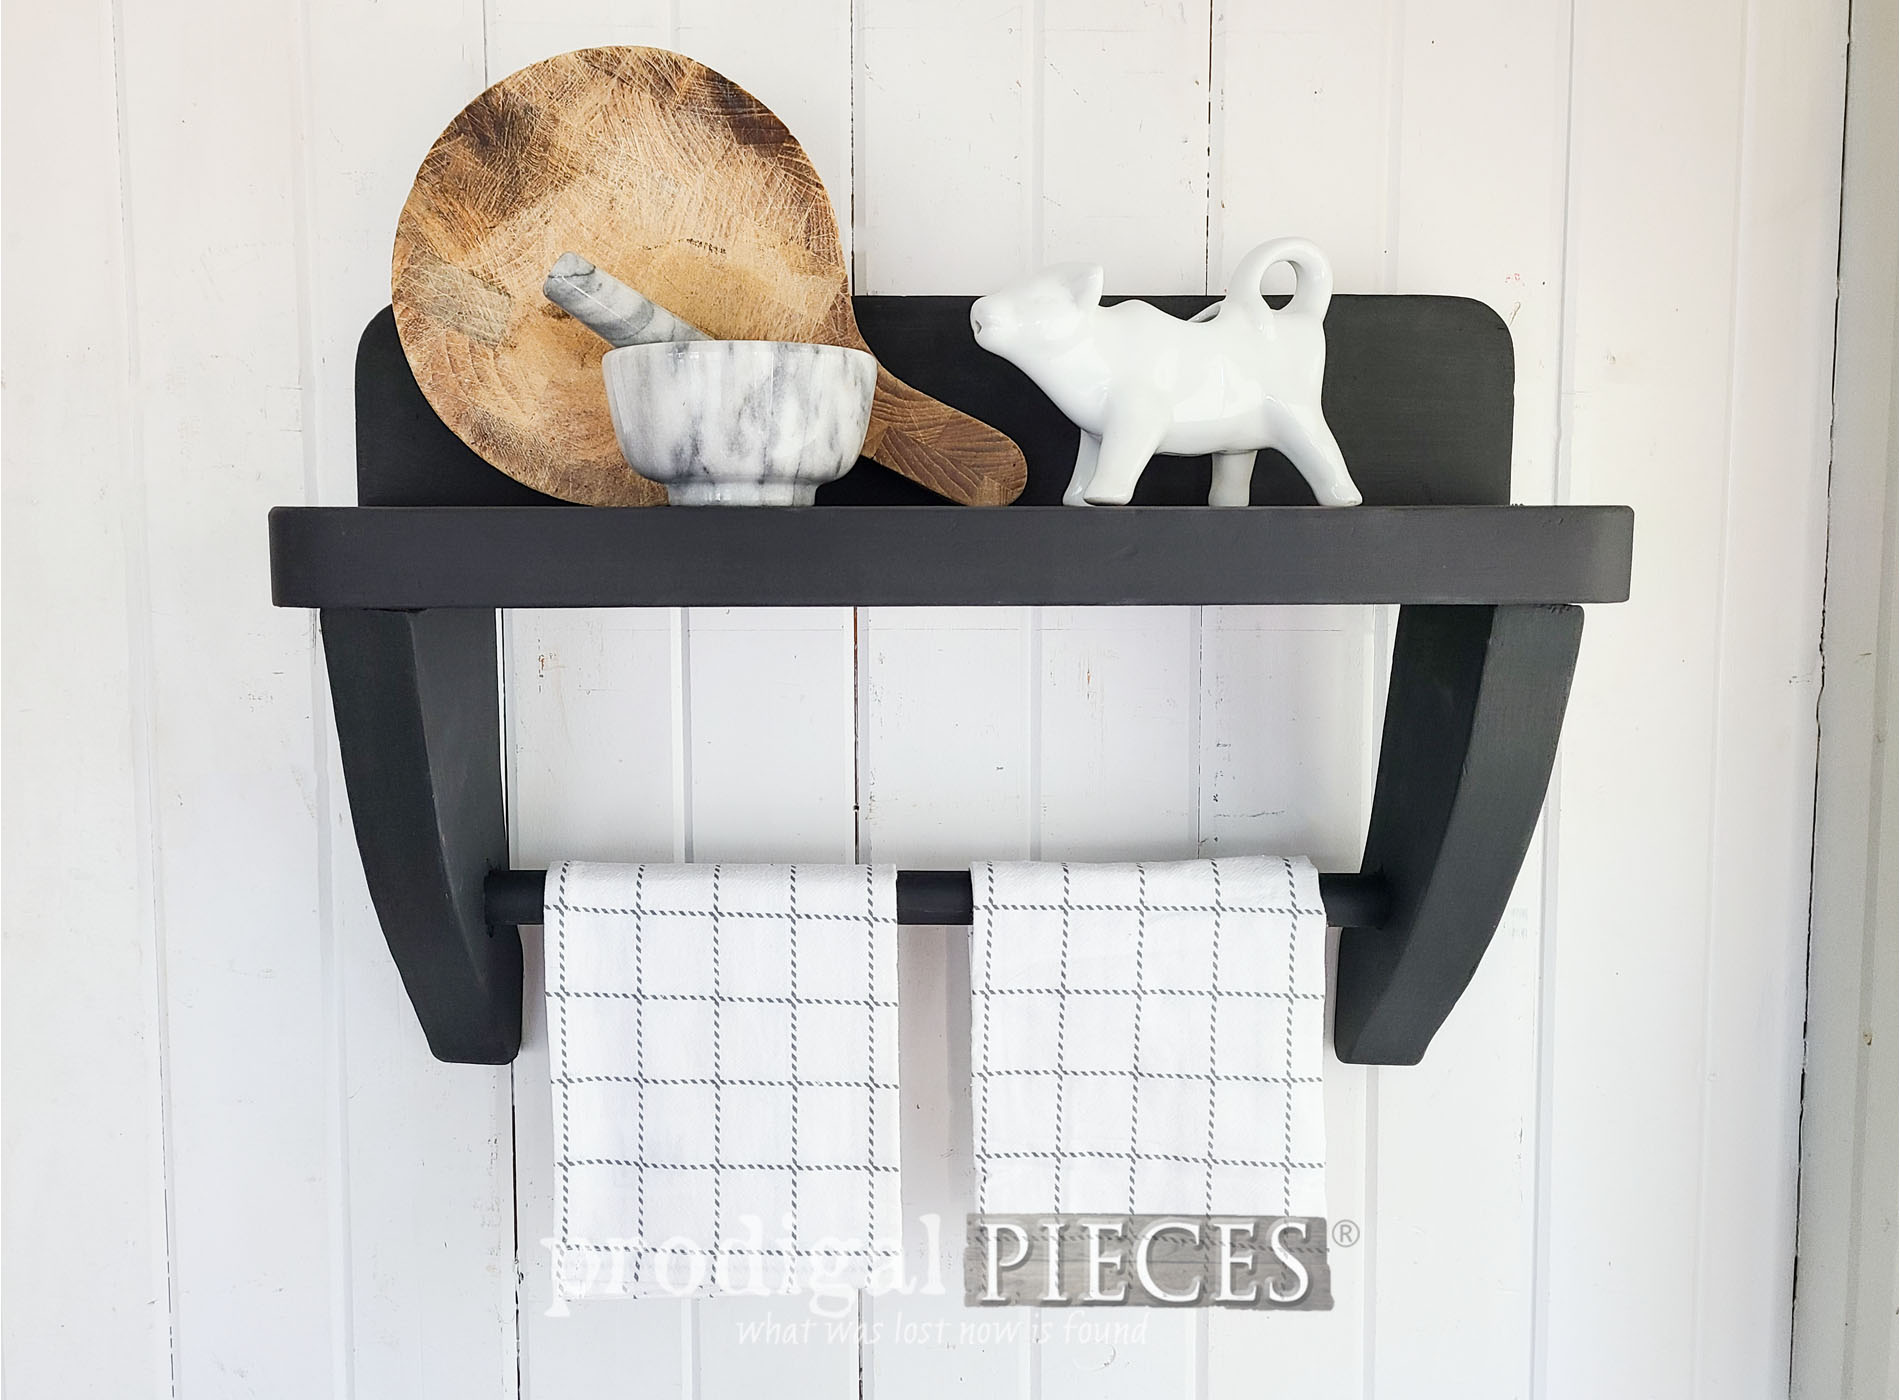 Featured Thrifted Table Upcycled by Larissa of Prodigal Pieces | prodigalpieces.com #prodigalpieces